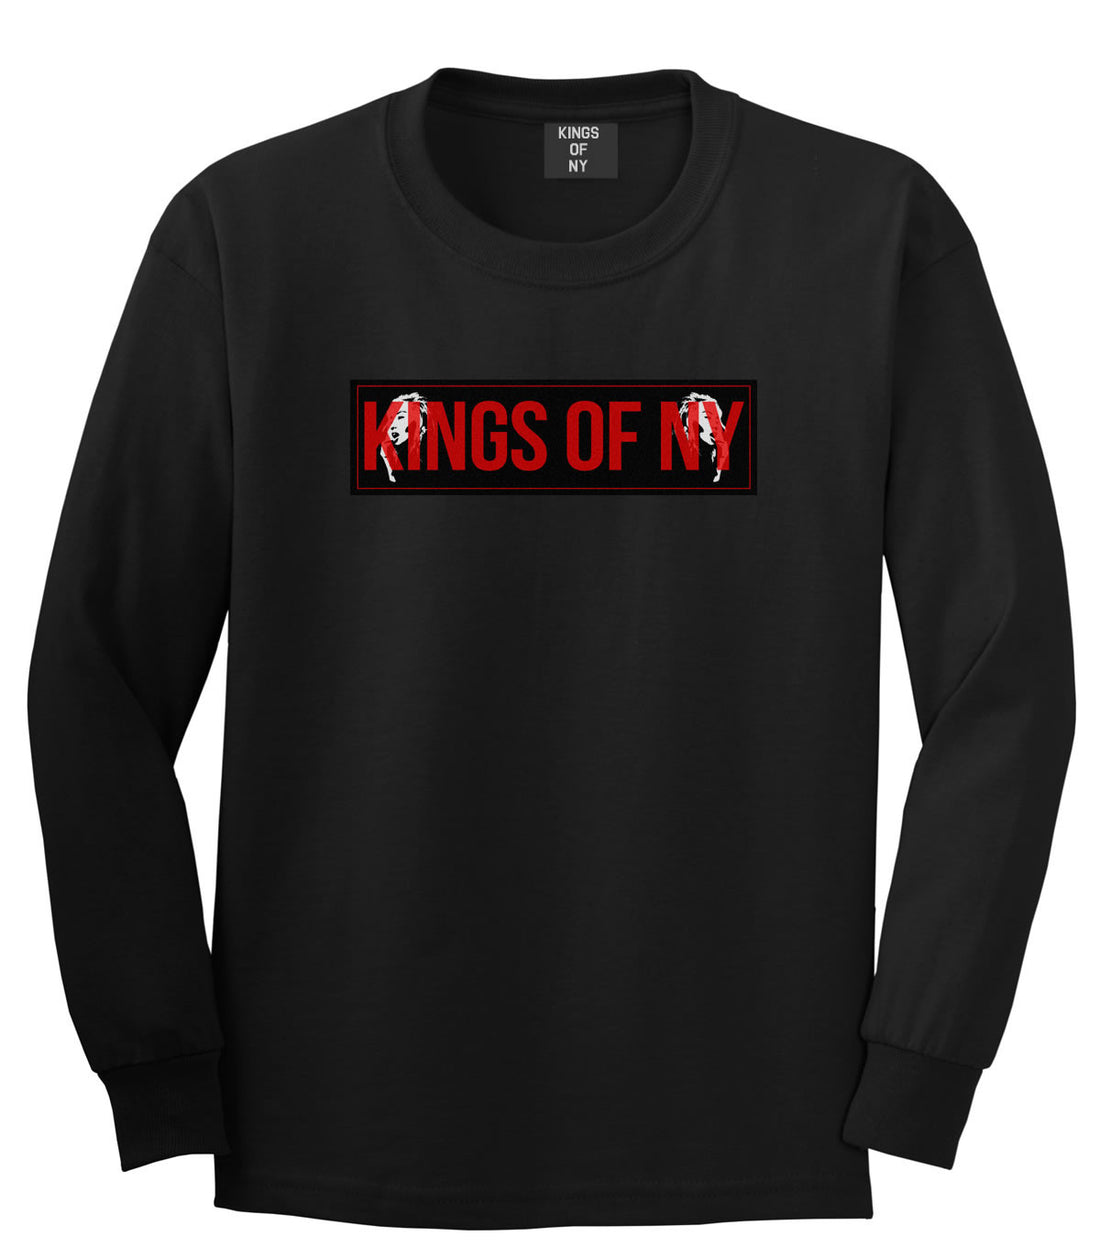 Red Girl Logo Print Long Sleeve T-Shirt in Black by Kings Of NY